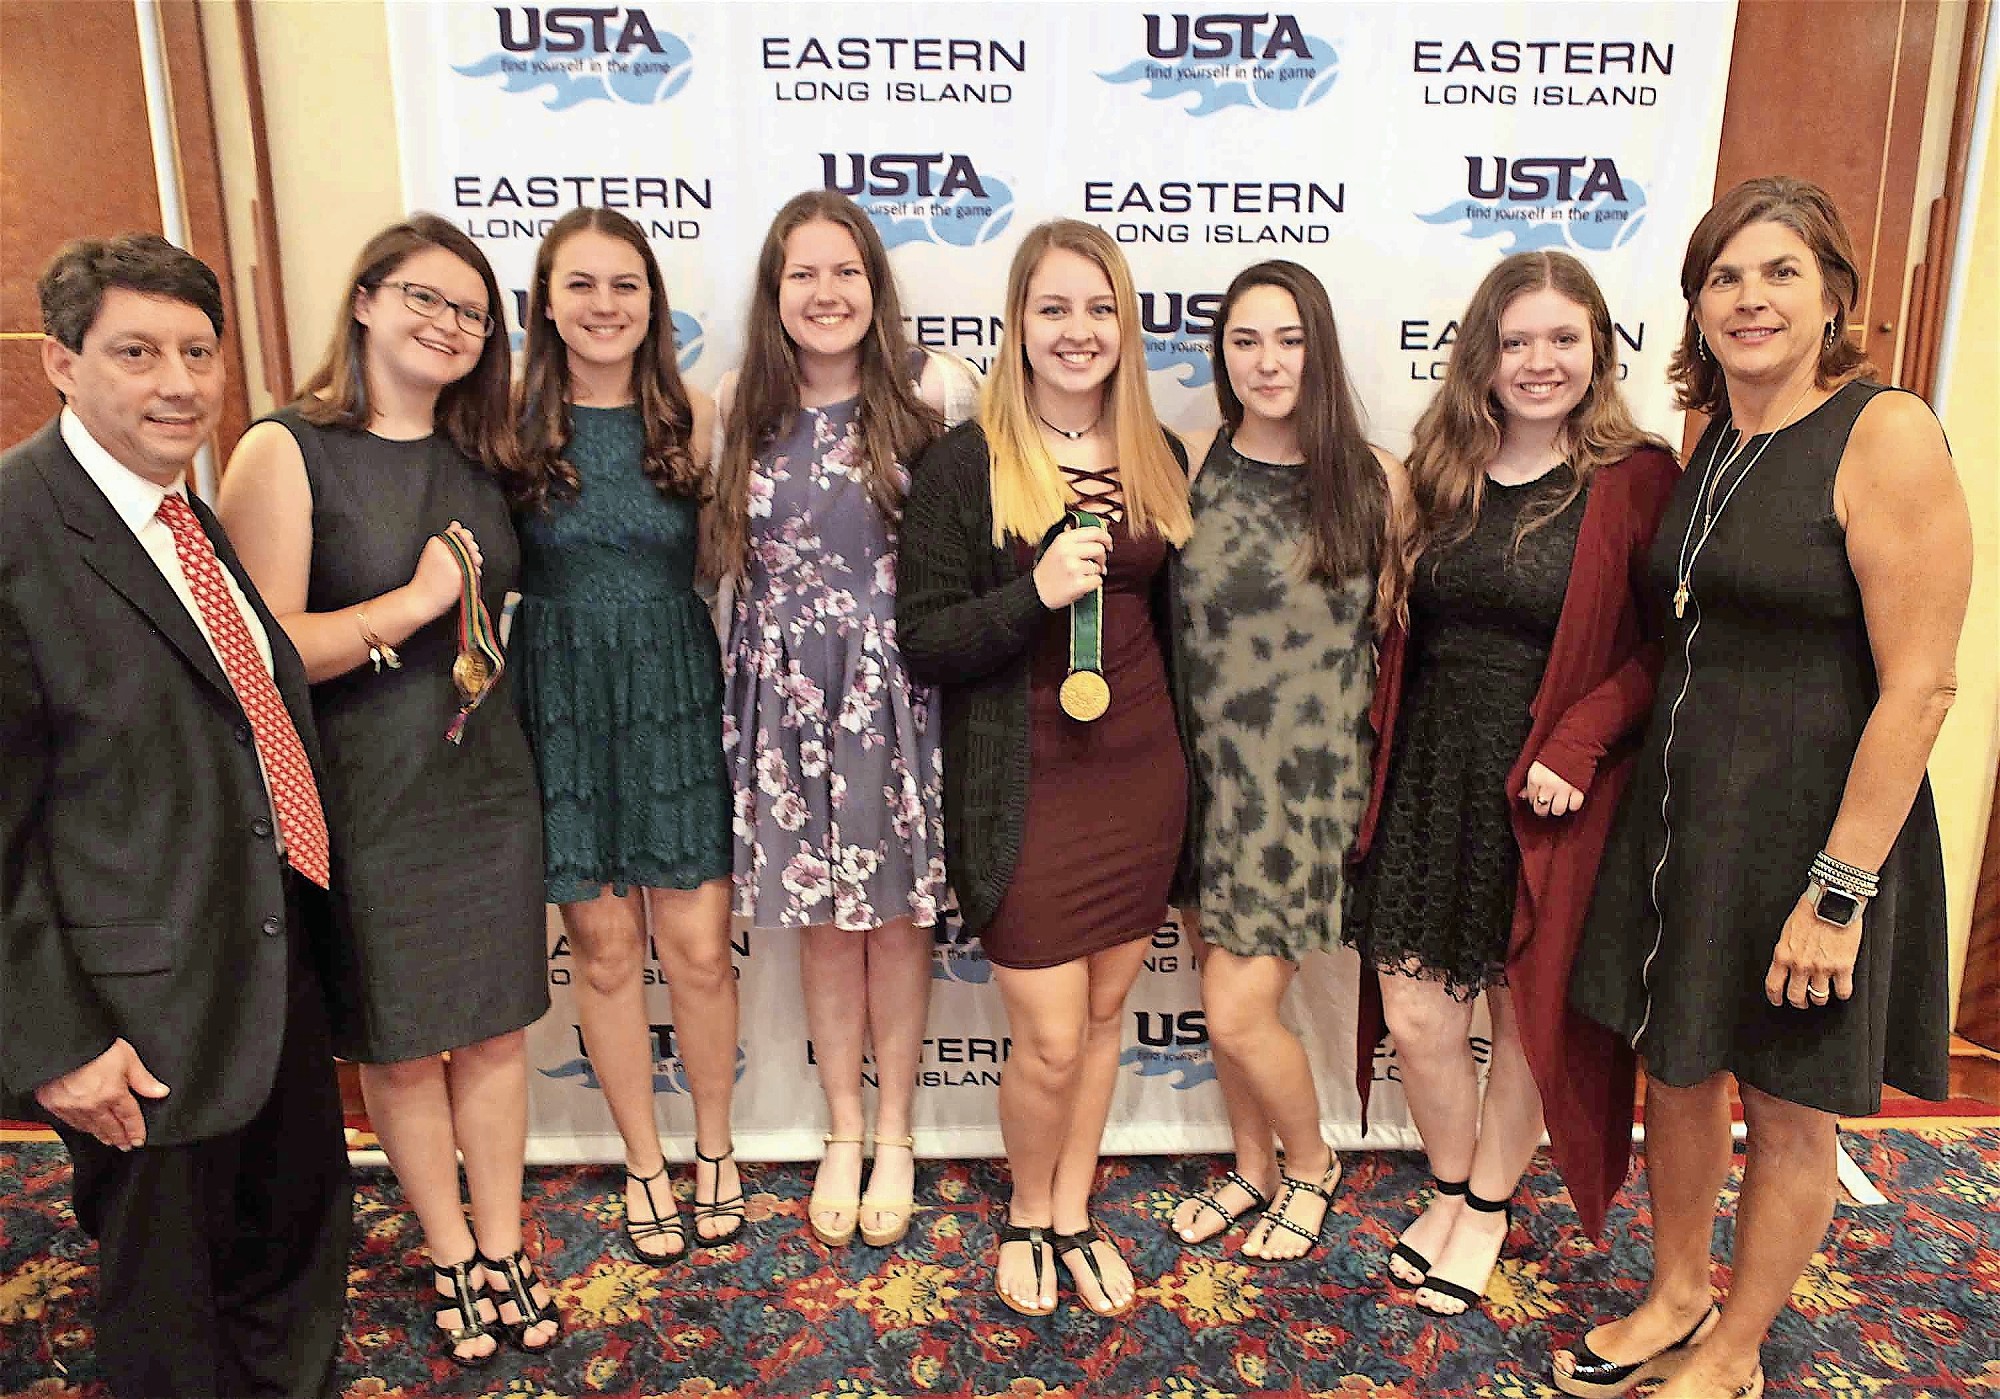 The MacArthur girls’ tennis squad was named the High School Team of the Year at the U.S. Tennis Association Long Island Region Awards. Members of the team met with USTA Long Island President Jonathan Klee, far left, and International Tennis Hall of Fame member Gigi Fernandez, right, at the May 3 ceremony.